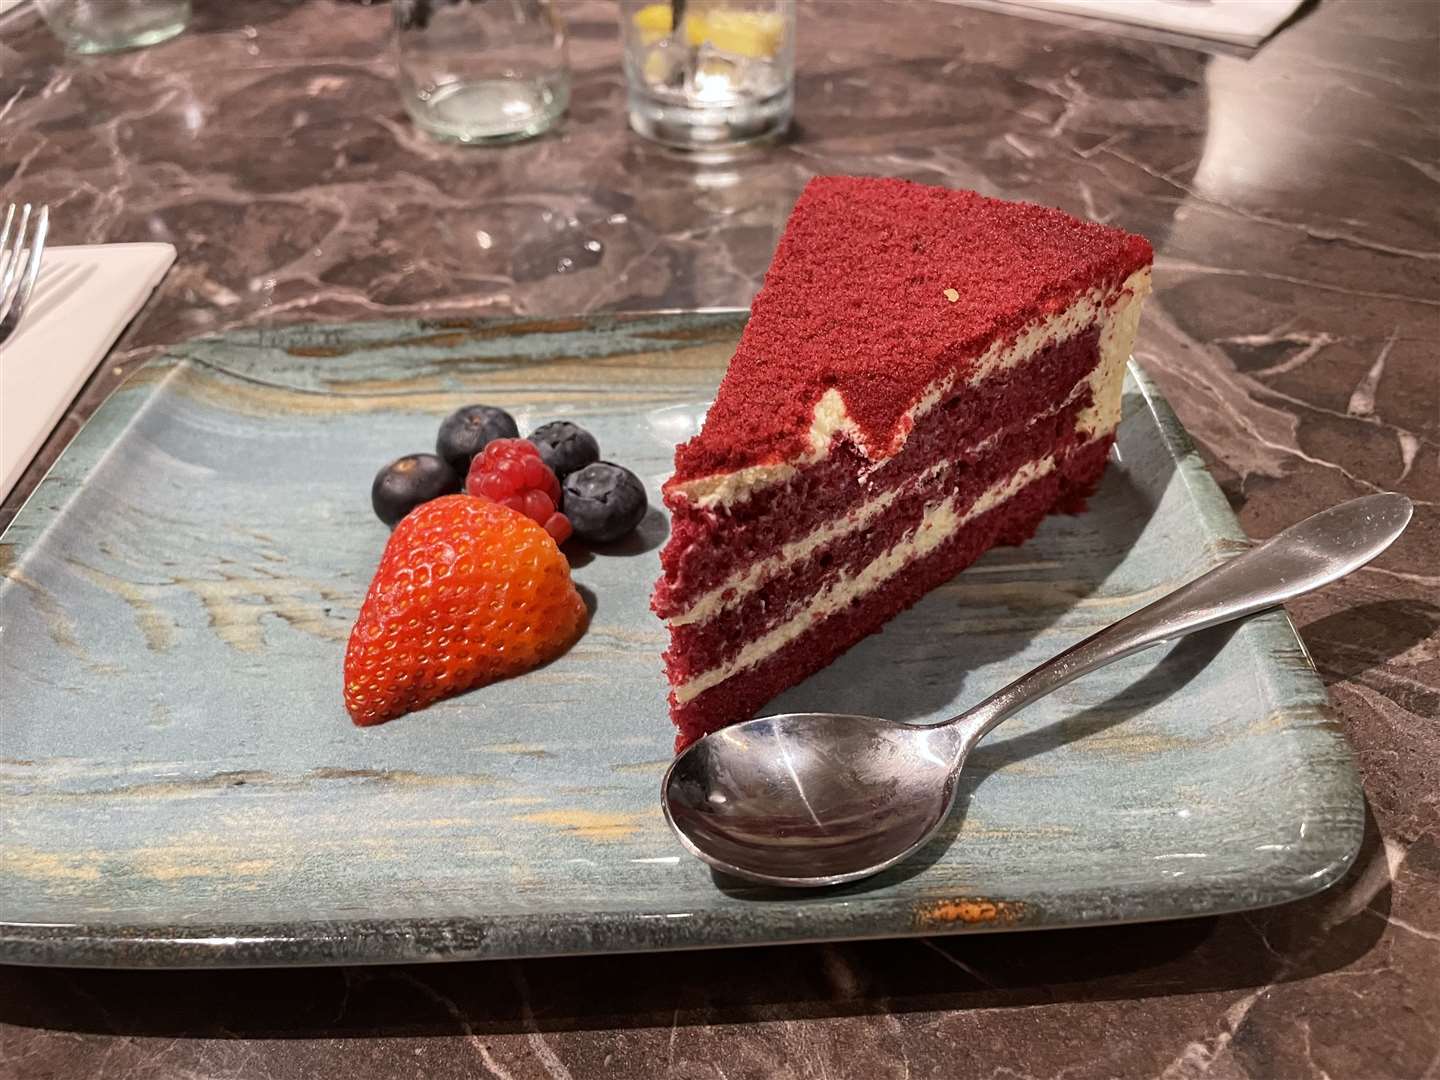 The red velvet cake was slightly disappointing